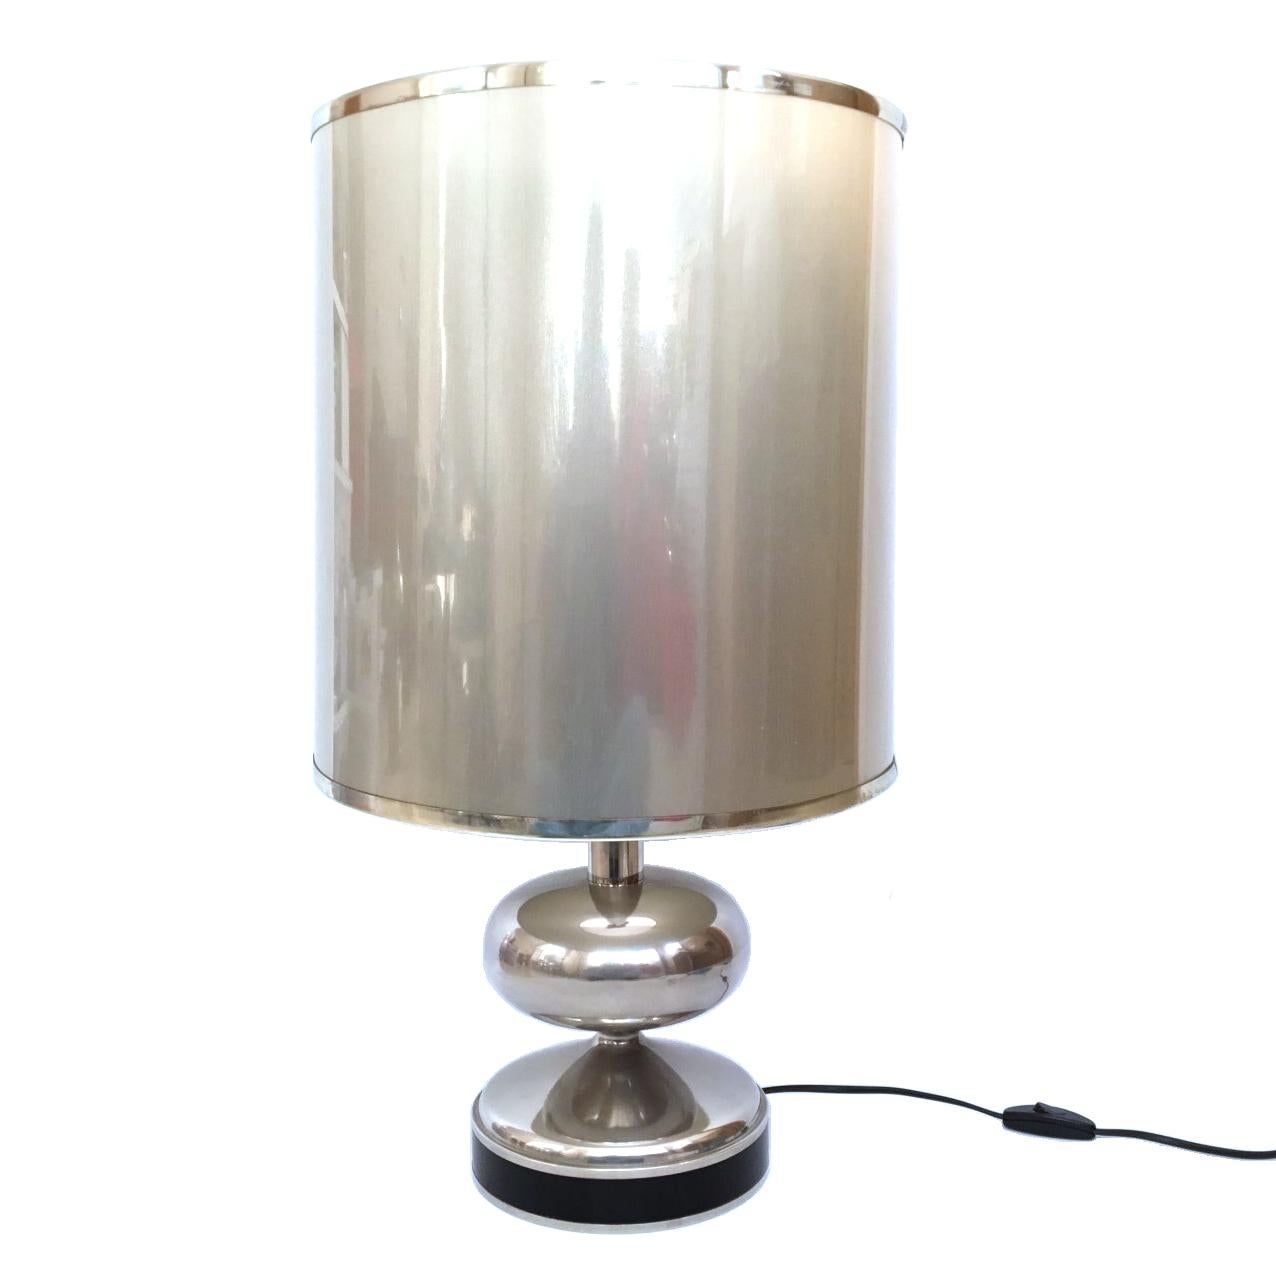 Late 20th Century Pair of Midcentury Chromed Spanish Table Lamps, 1970s